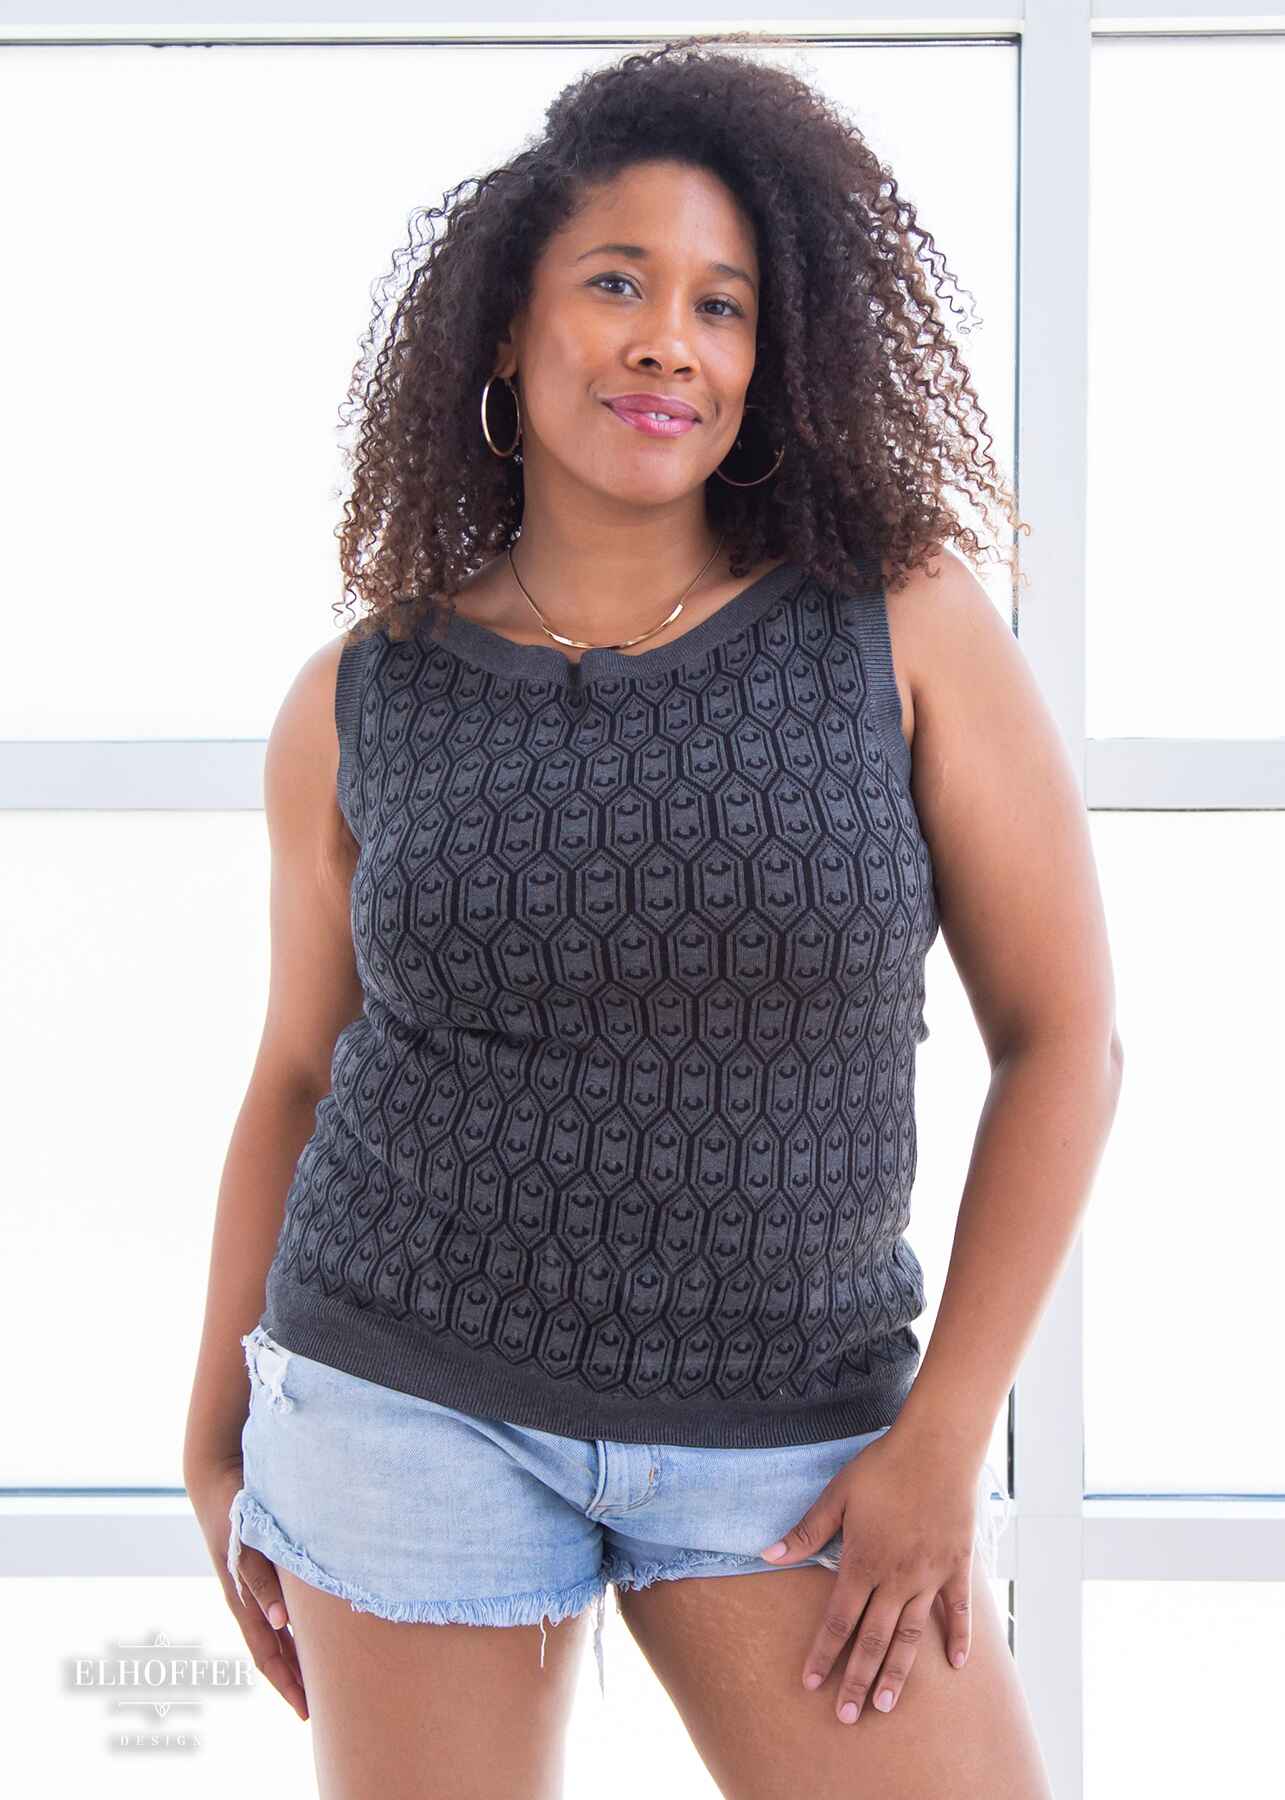 Francesca, a light brown skinned L model with long dark brown tight curly hair, is wearing a knit sleeveless top with a boatneck and an armor plated design.